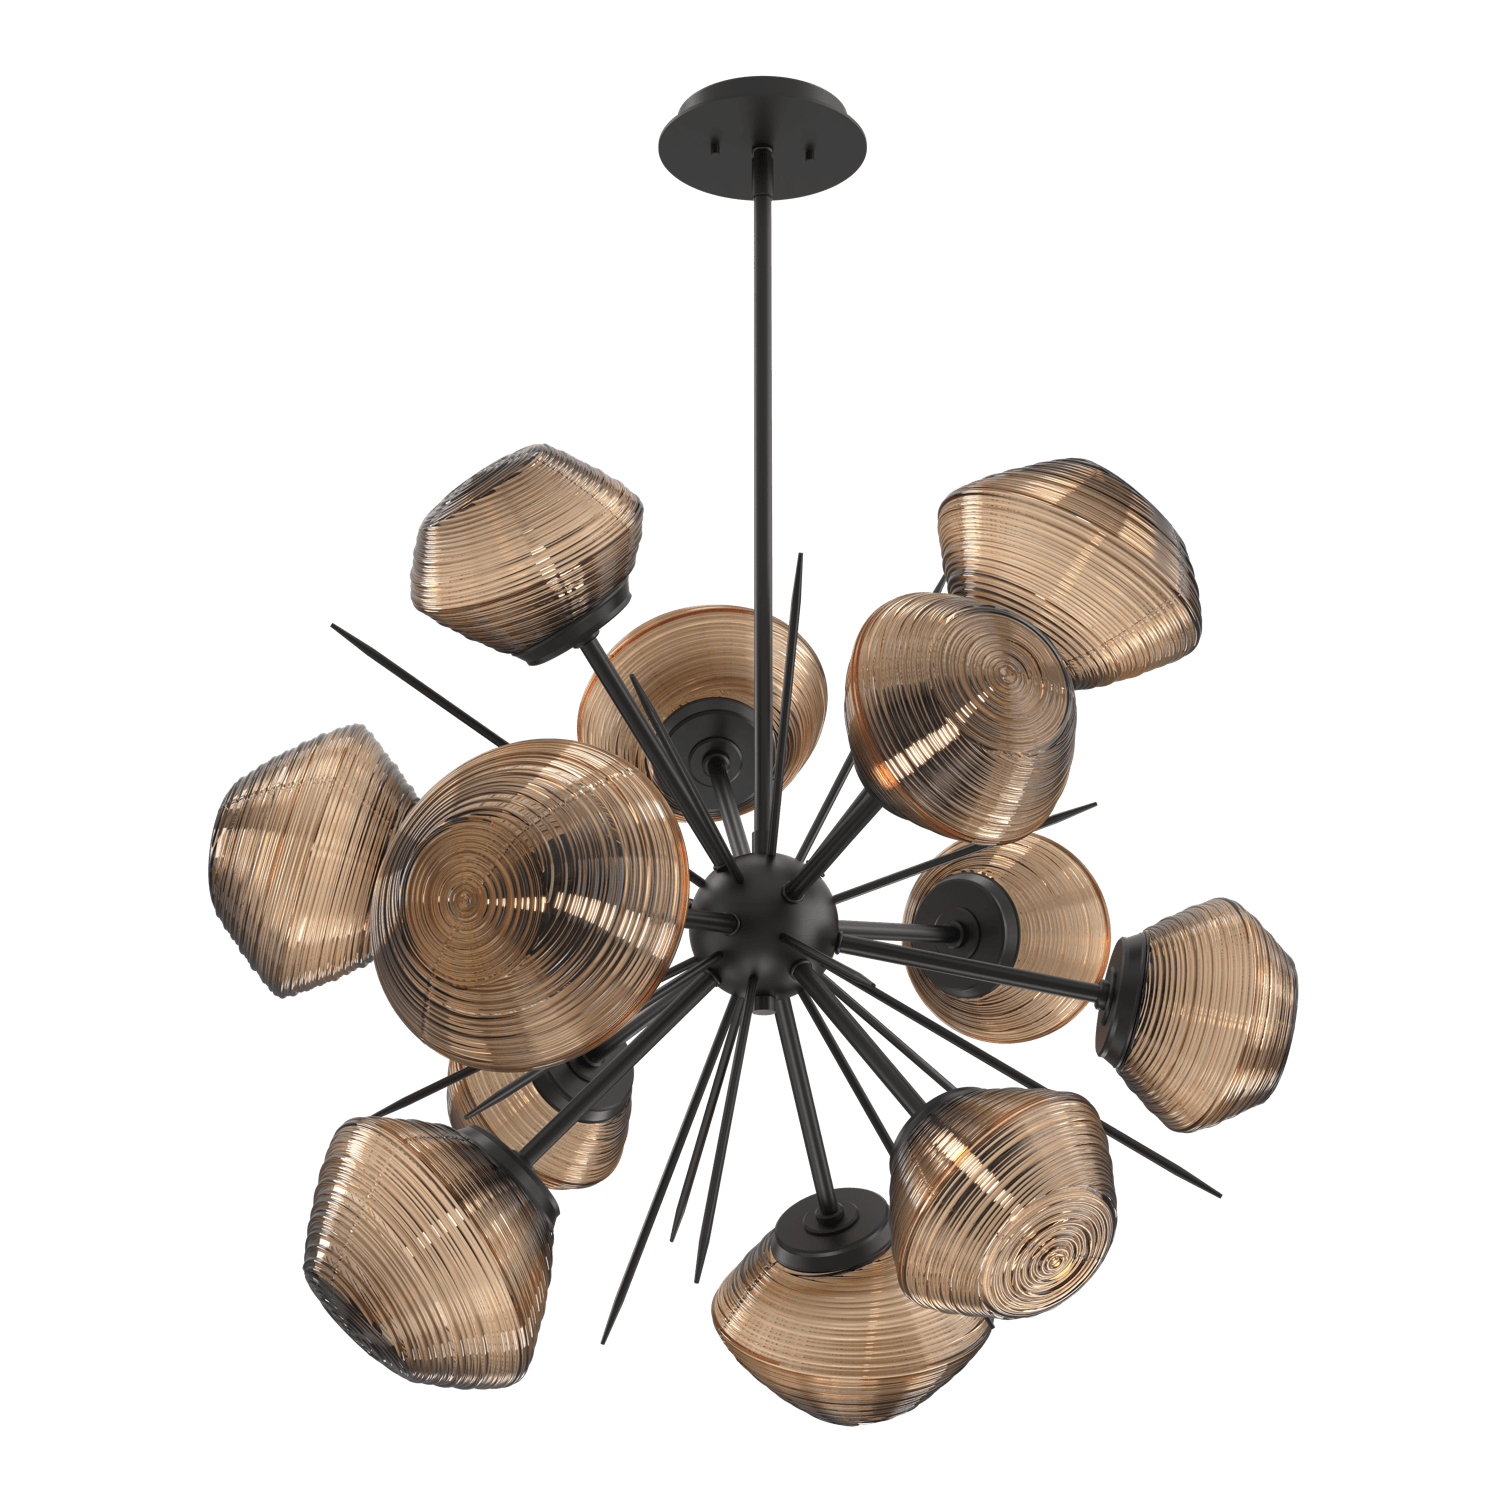 CHB0089-0G-MB-B-Hammerton-Studio-Mesa-36-inch-starburst-chandelier-with-matte-black-finish-and-bronze-blown-glass-shades-and-LED-lamping